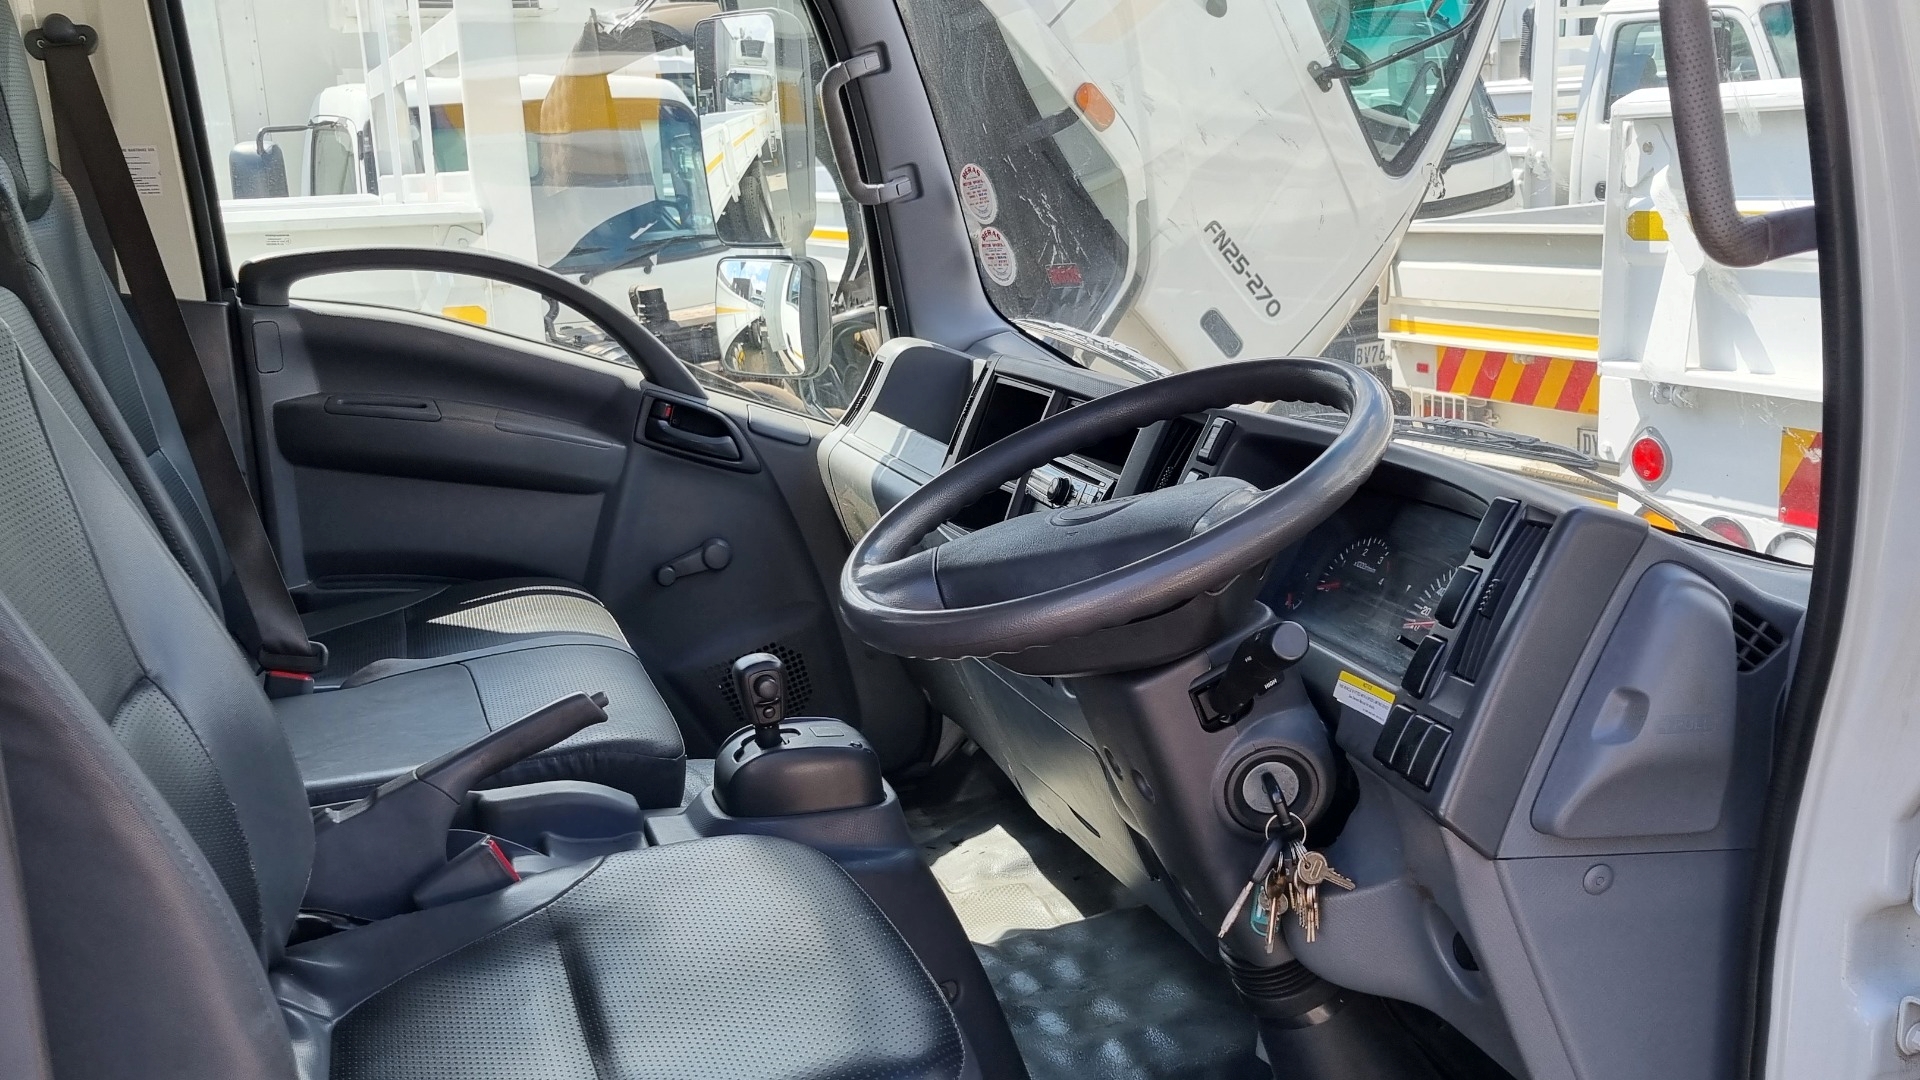 Isuzu Box trucks NQR500 AMT 5TON 2018 for sale by A to Z TRUCK SALES | Truck & Trailer Marketplace